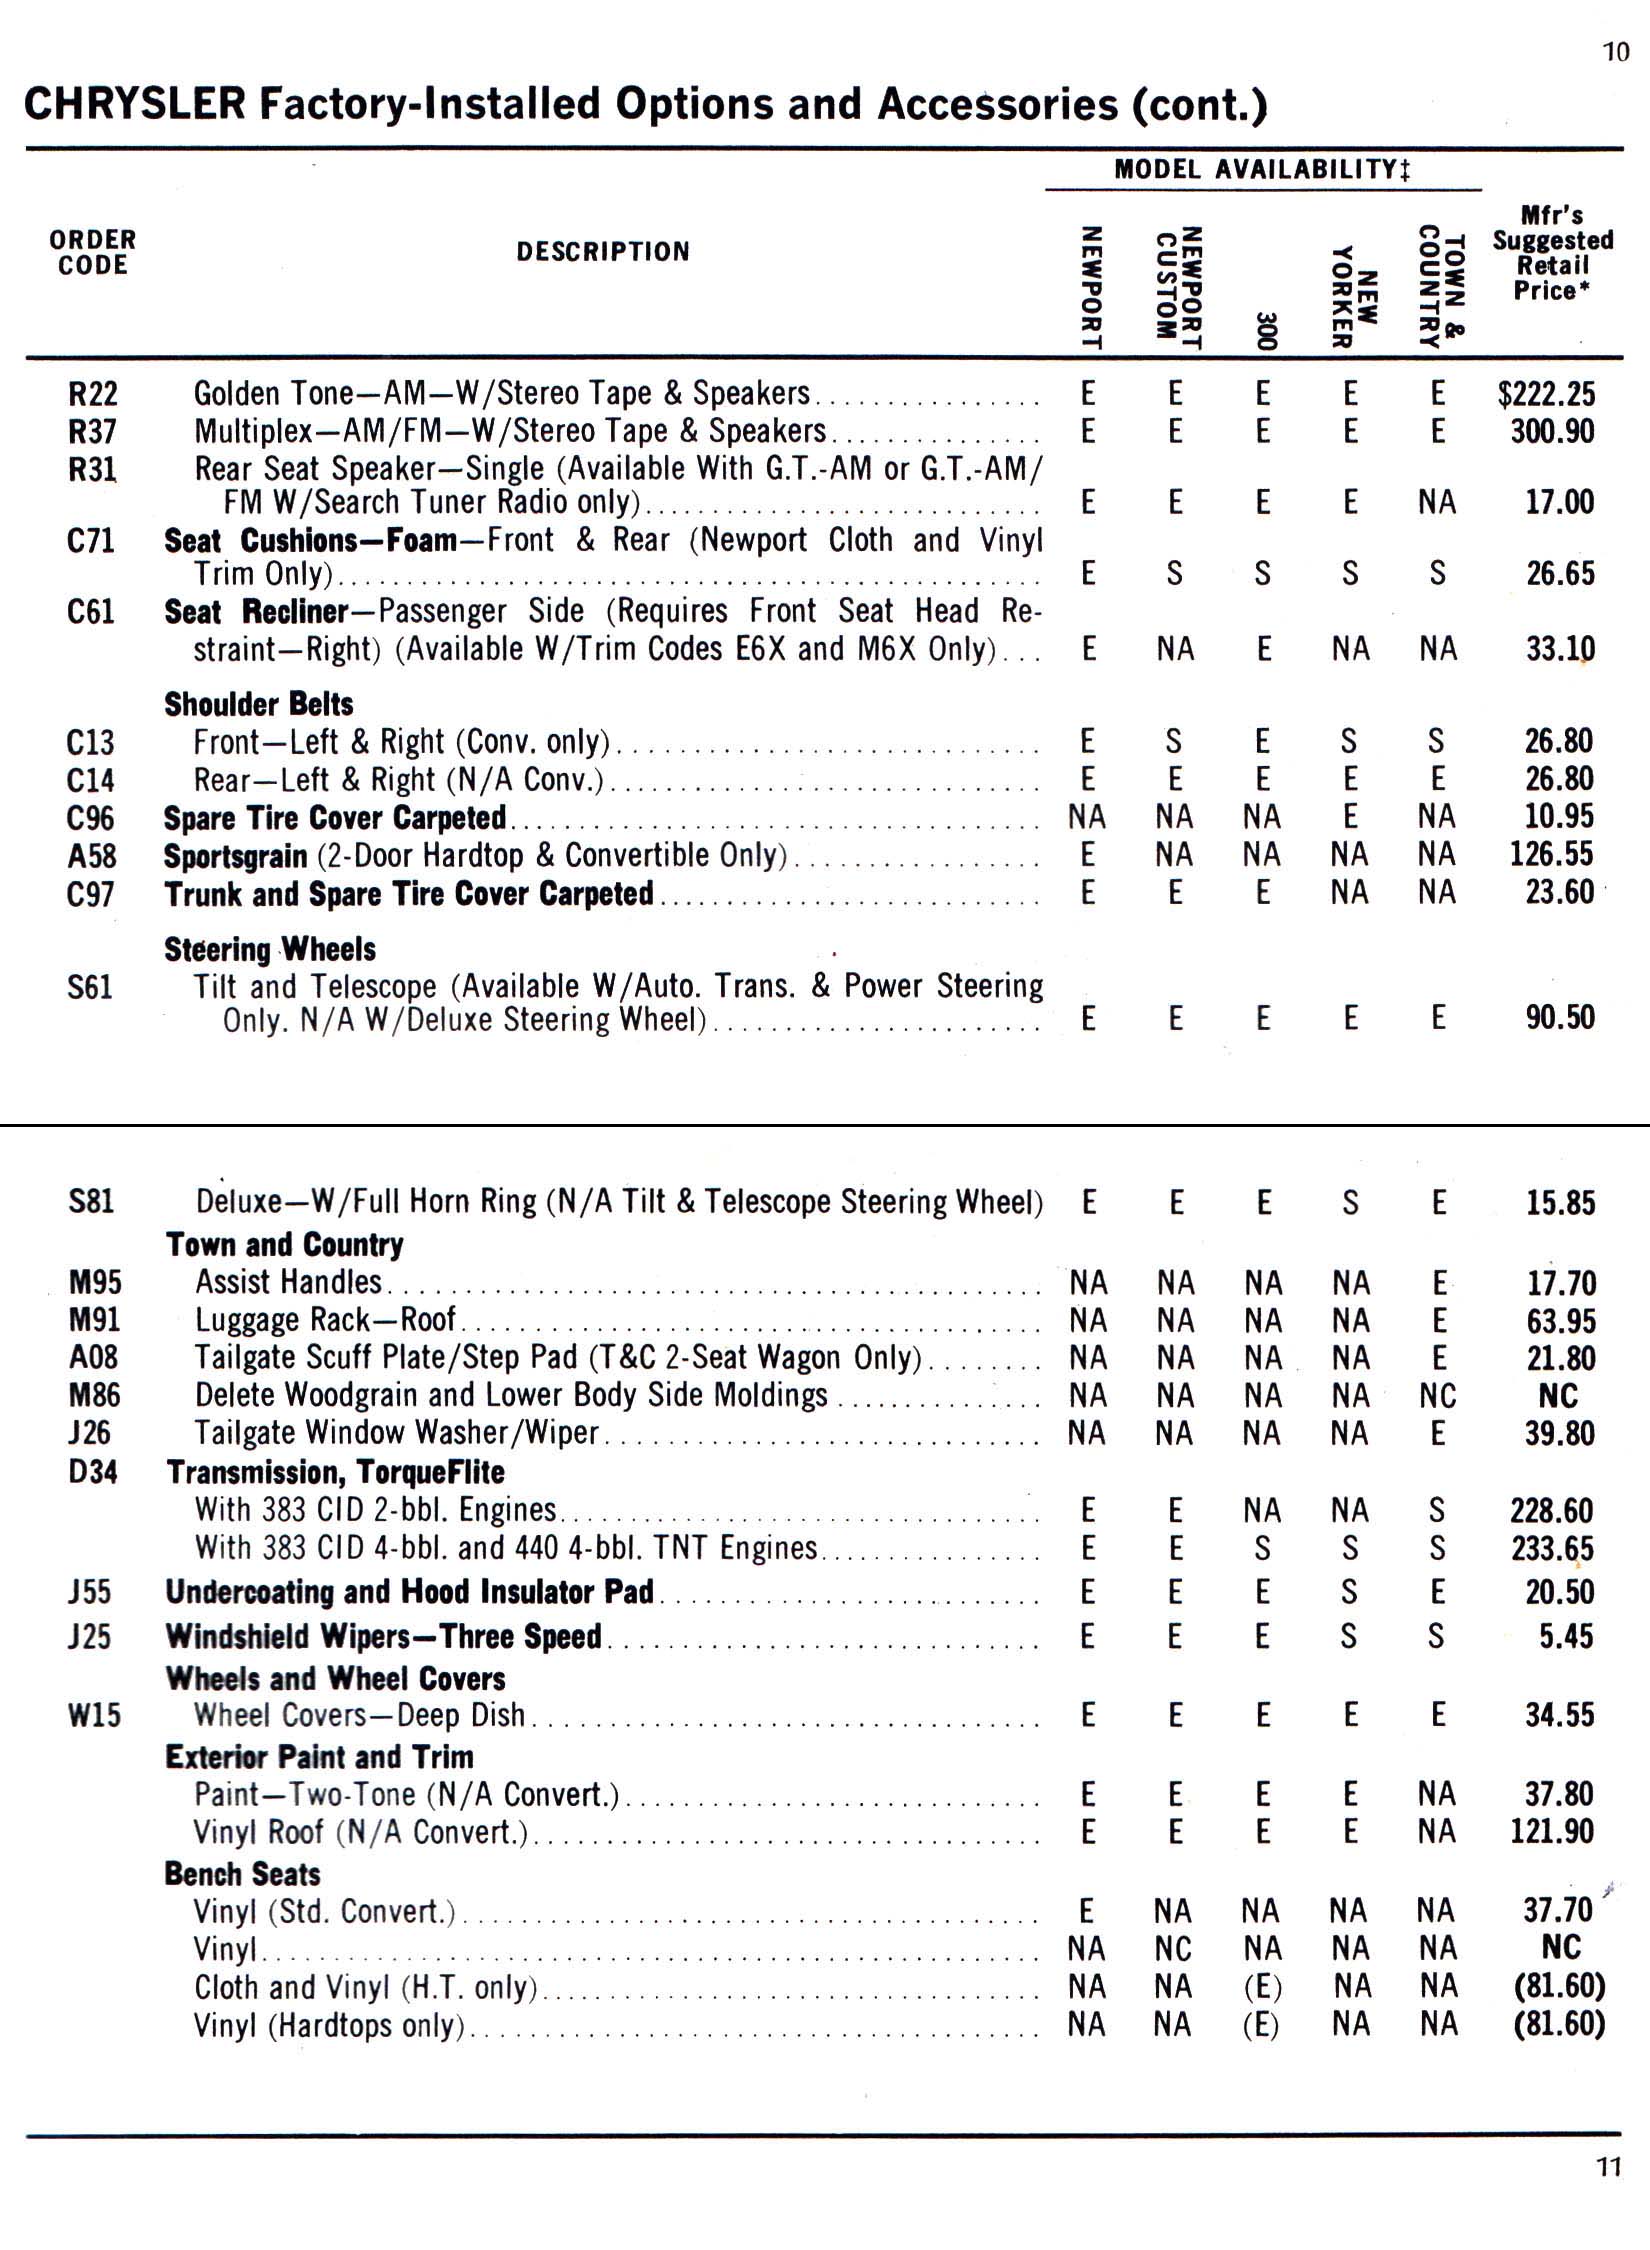 1969 Chrysler Car And Equipment Price List Page 2